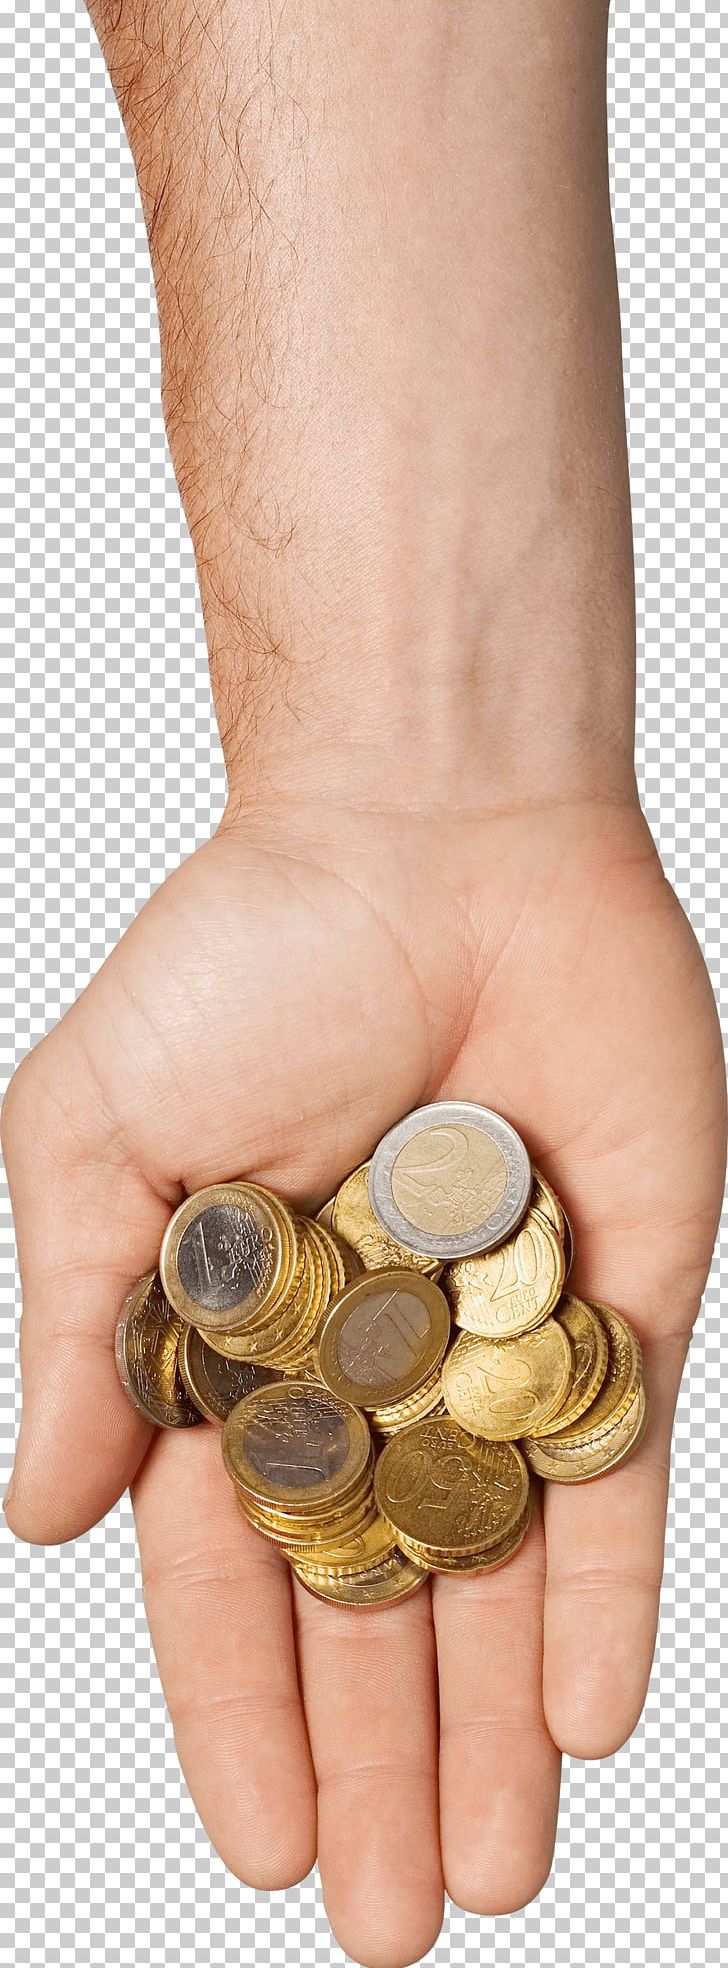 Hand Holding Coins PNG, Clipart, Coin, Objects Free PNG Download